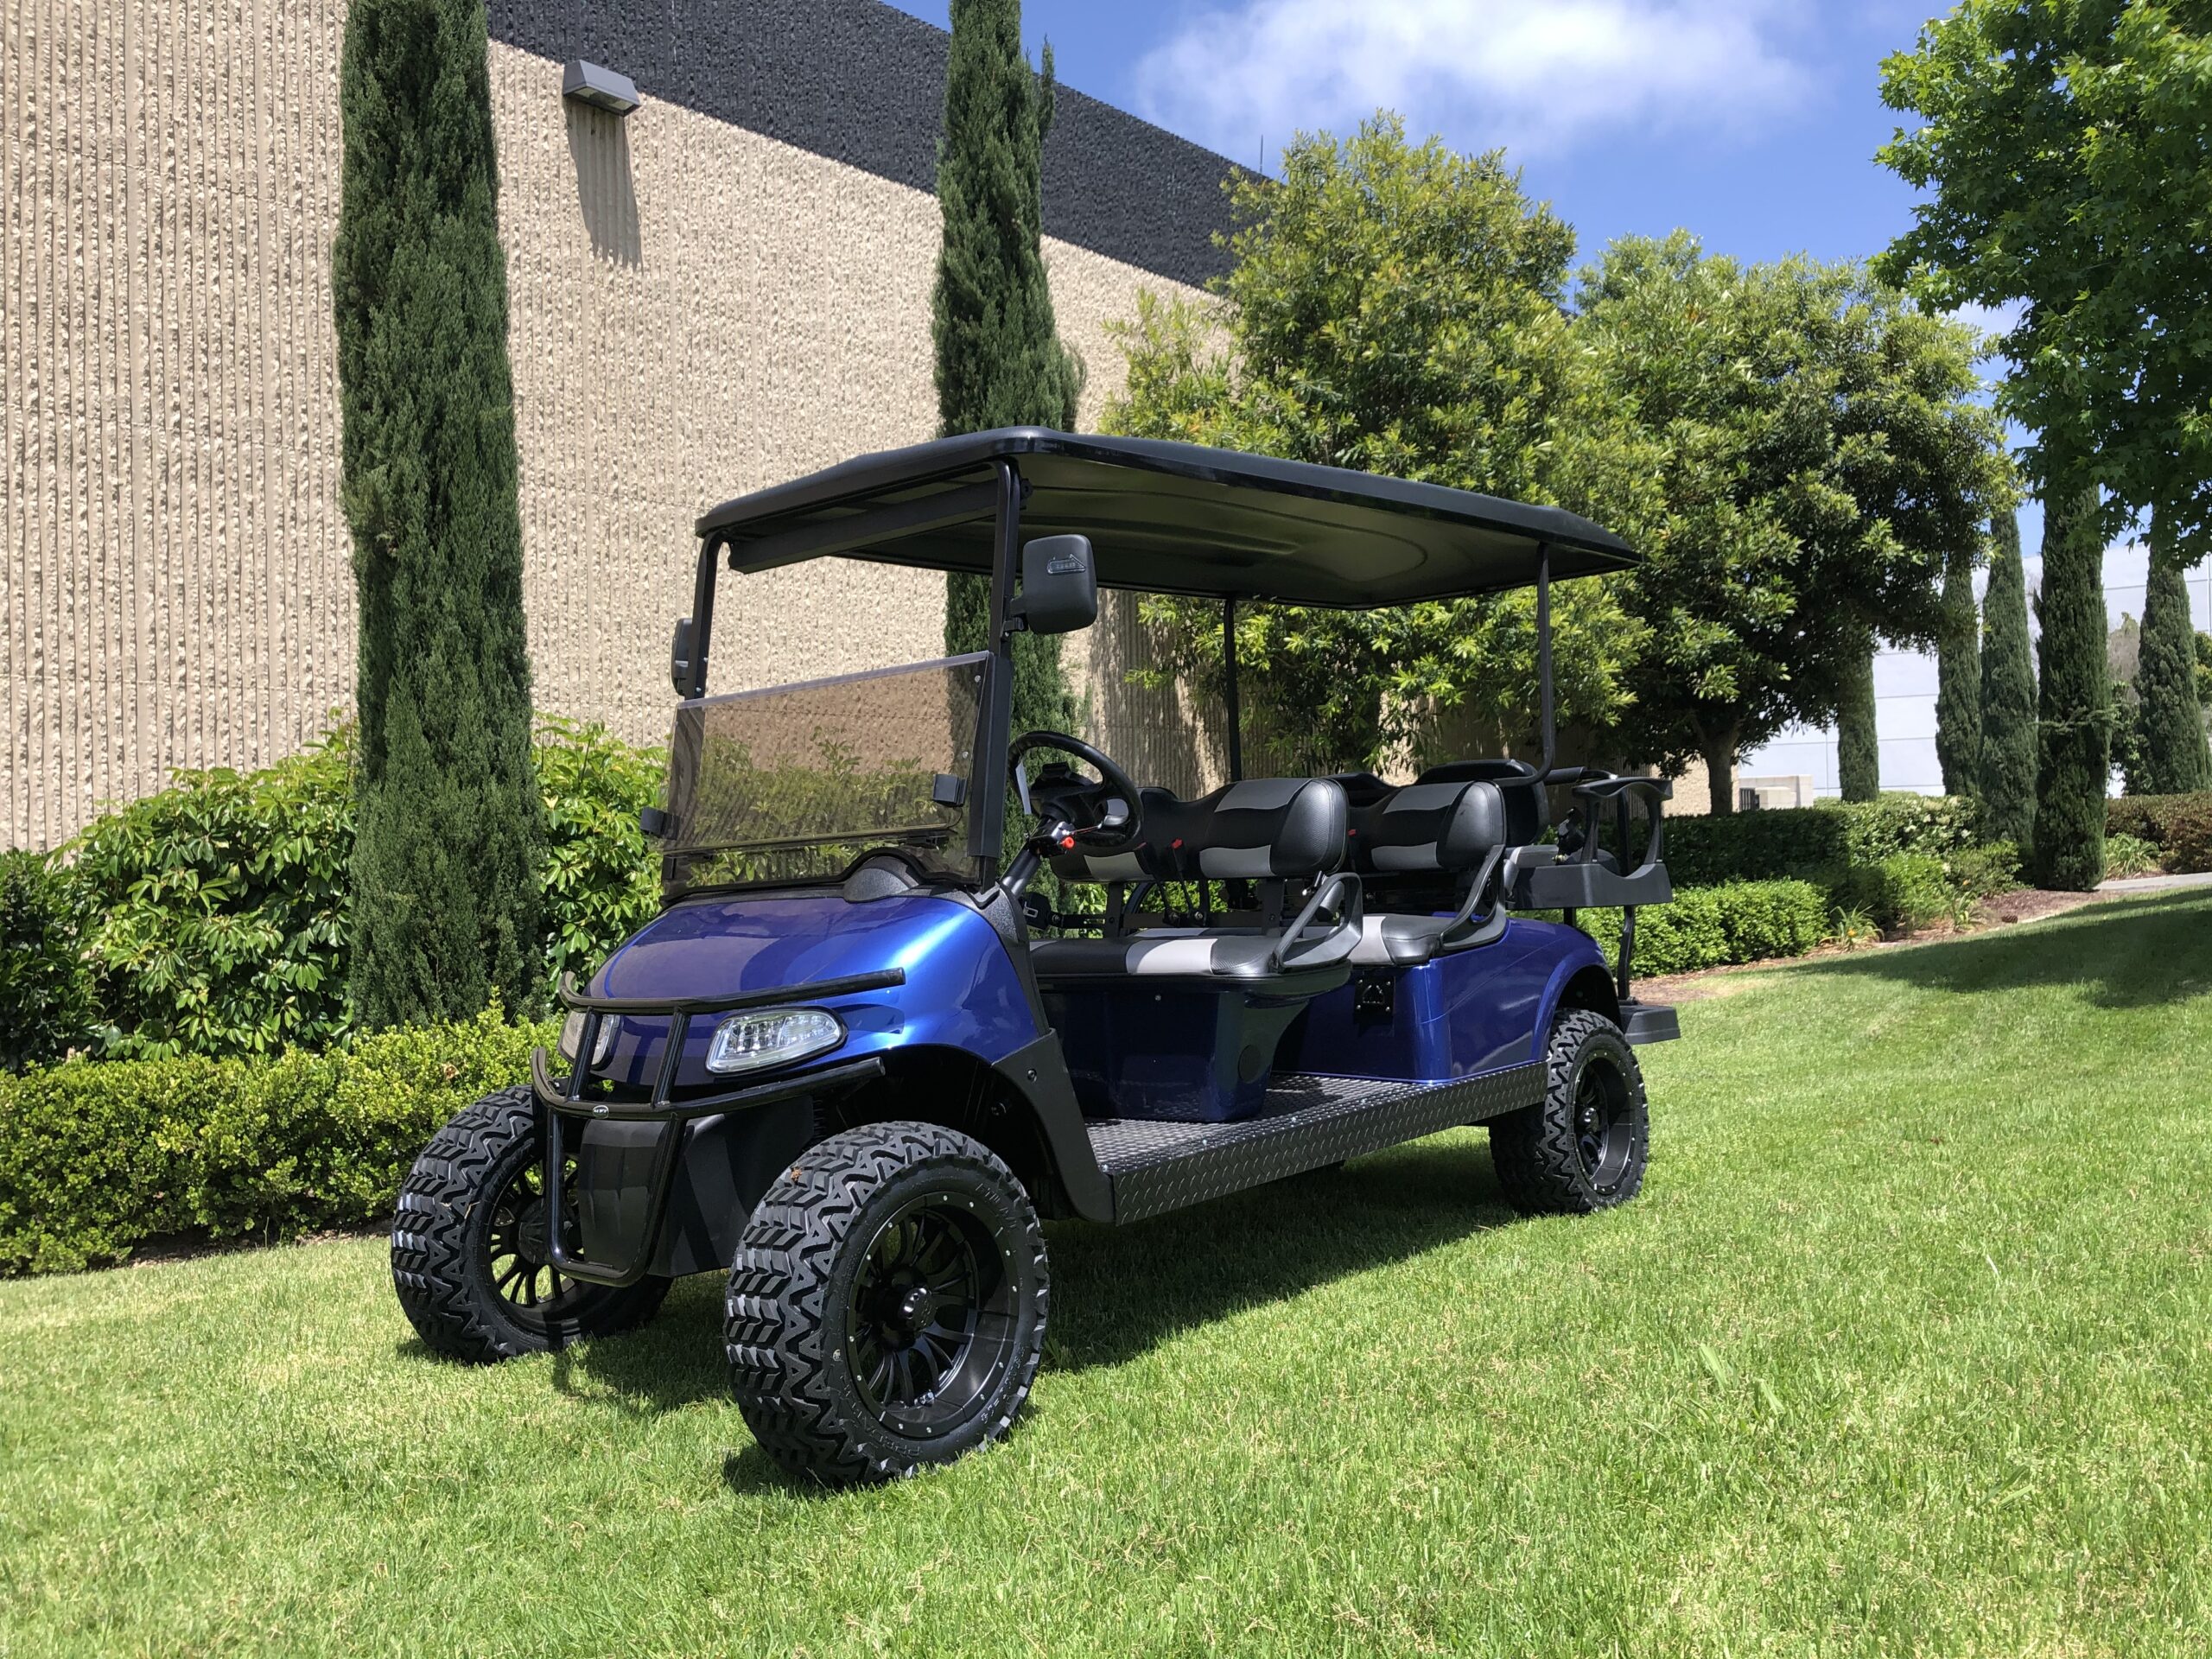 Ezgo Electric Rxv 6 Passenger Limo Stretched Golf Cart- Electric Blue #C31